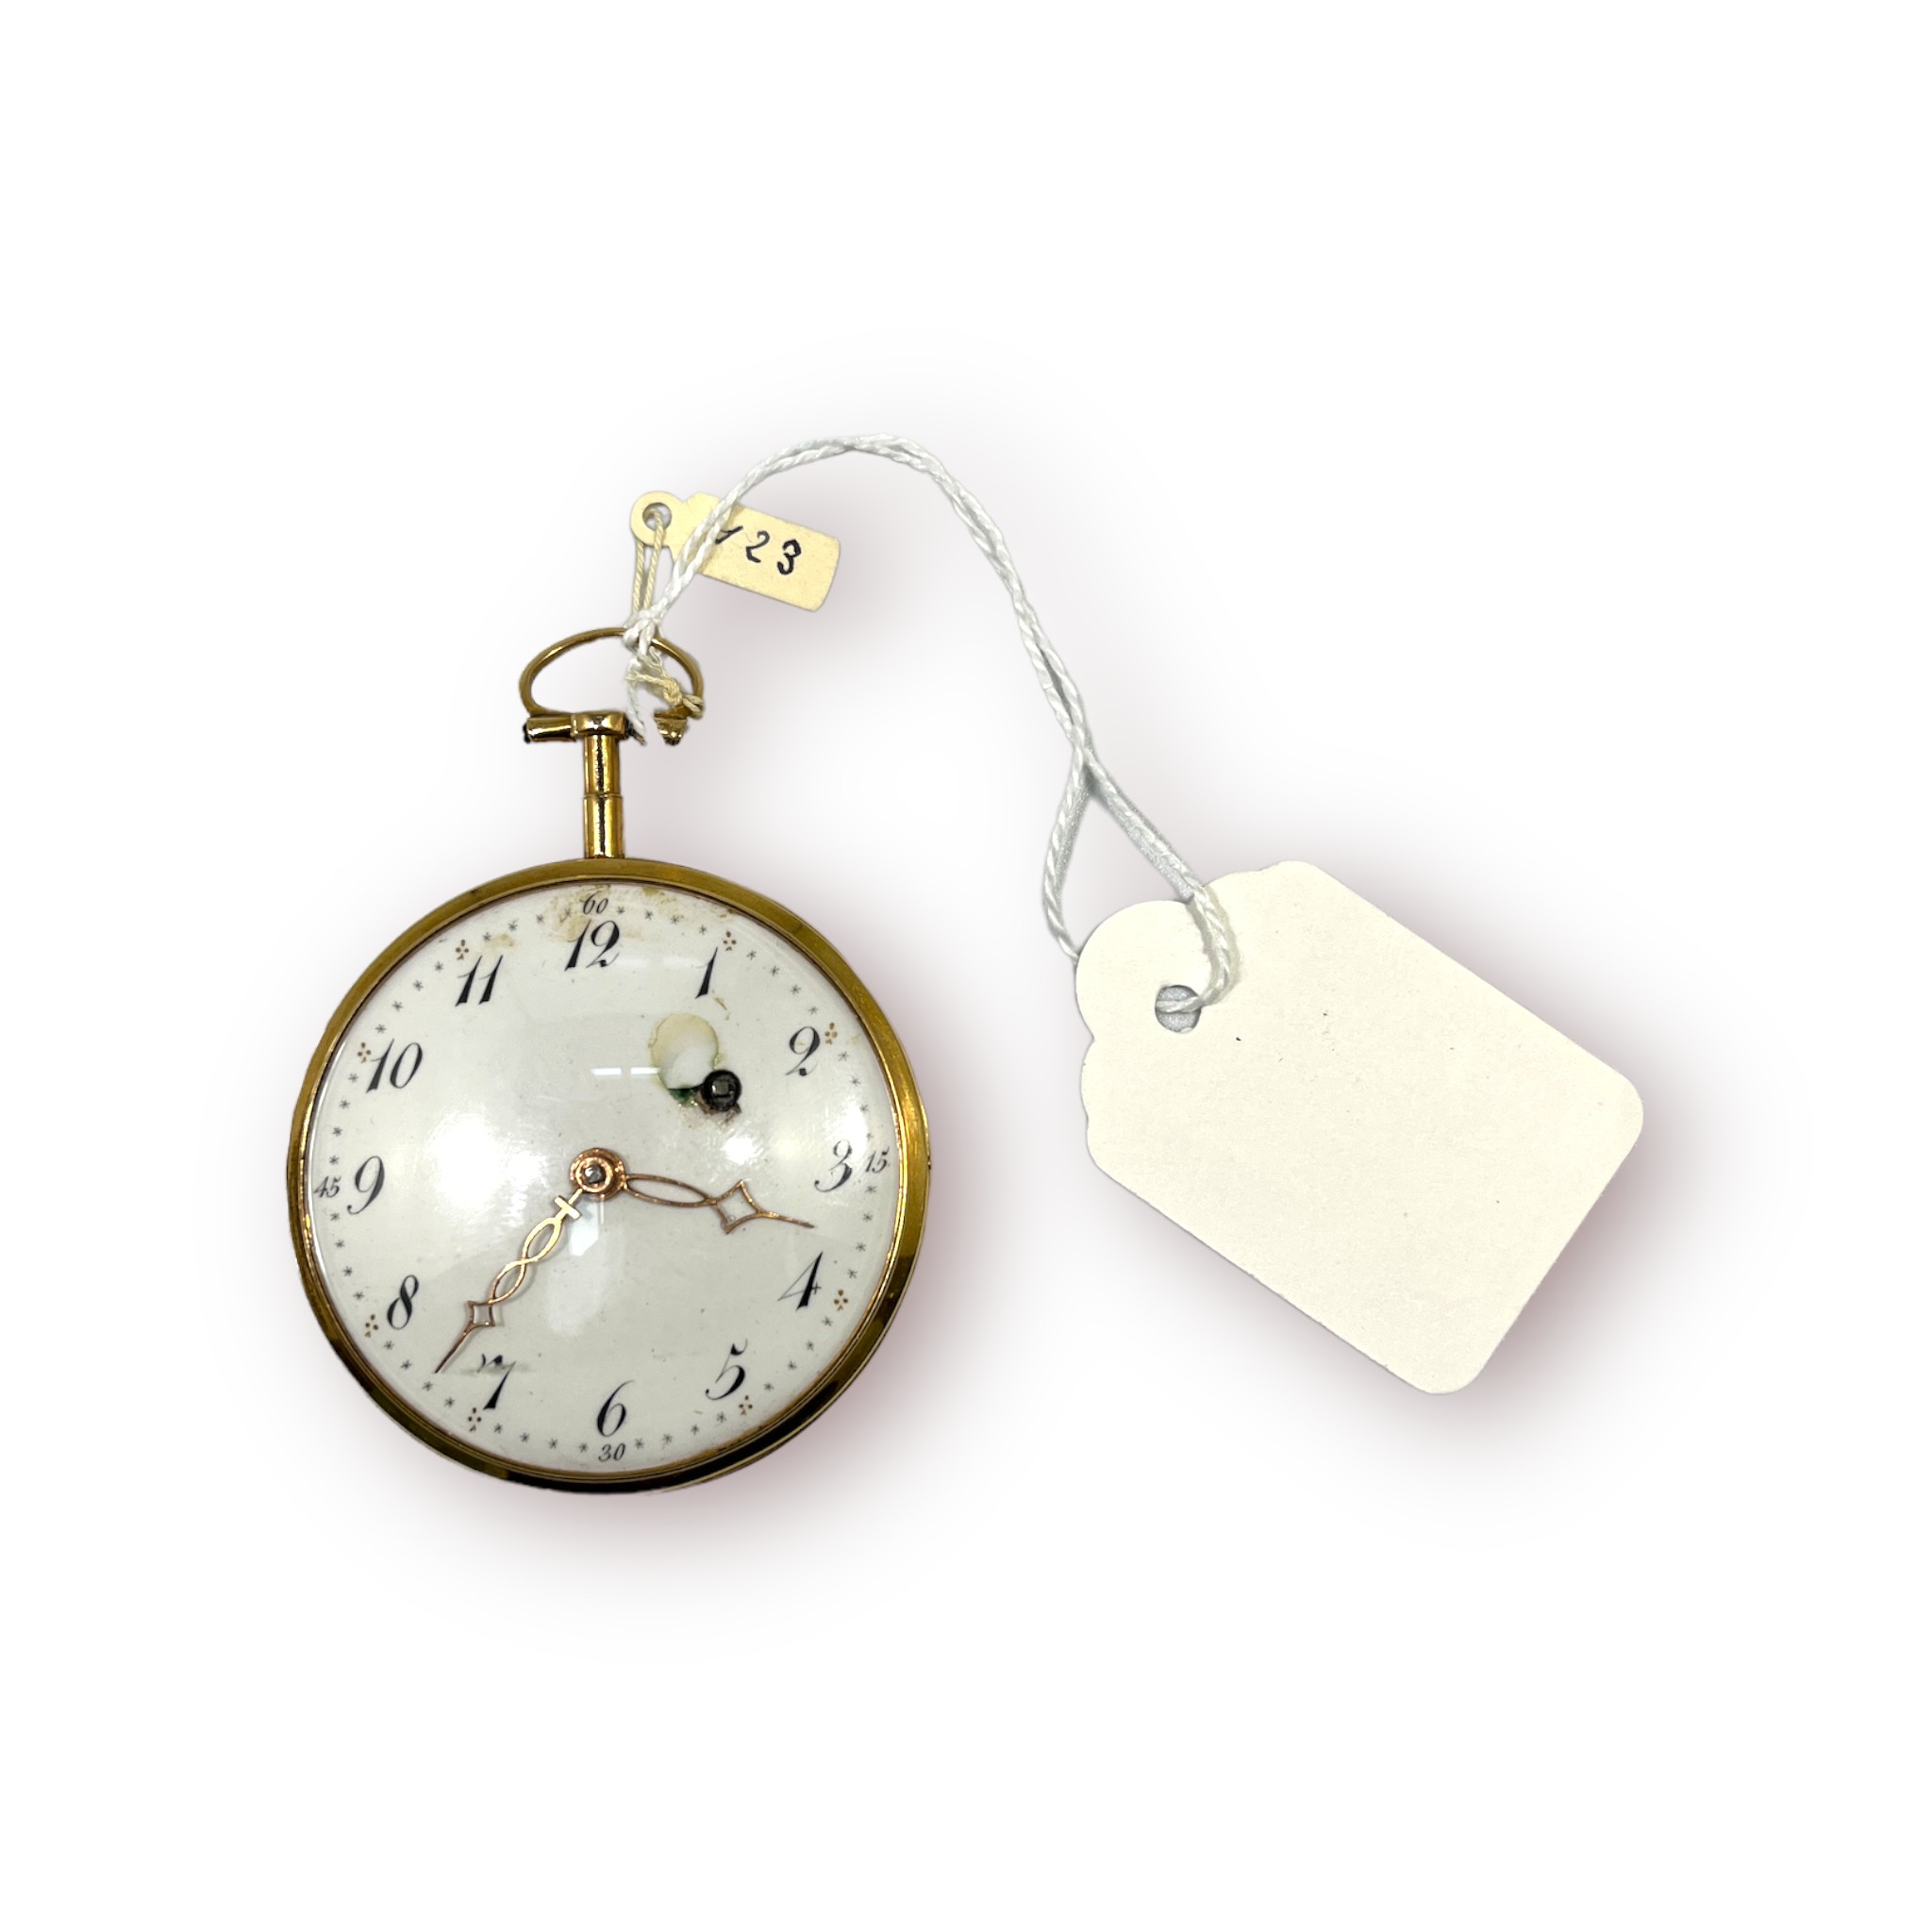 An 18th/19th century yellow metal (tests as 18ct gold) open-face pocket watch, the white enamel dial